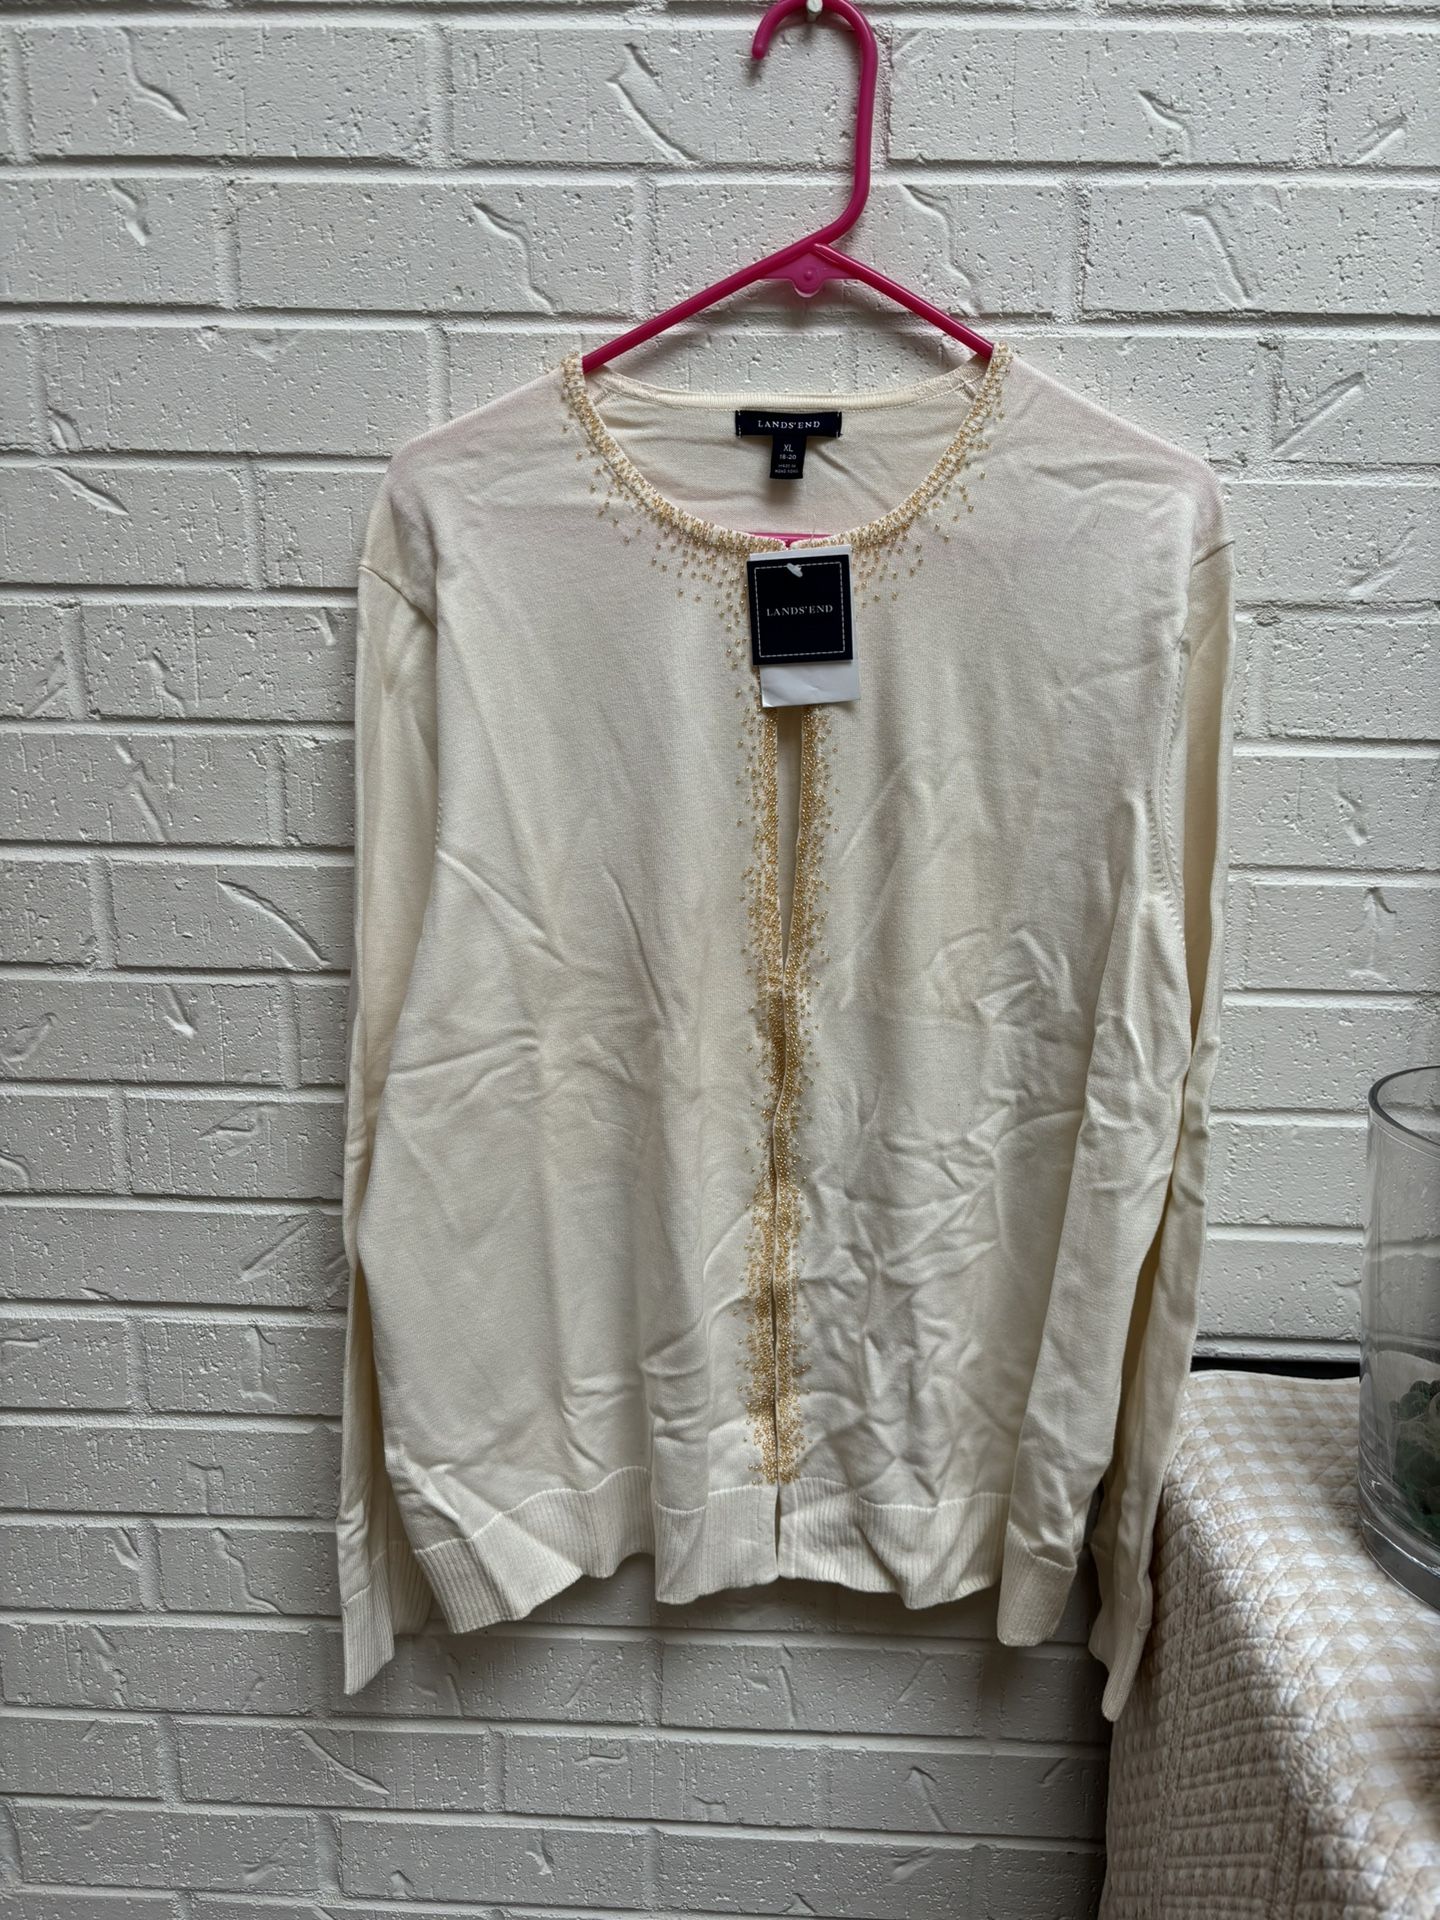 Land’s End NWT Women’s Cream Cotton Cardigan With Gold Beads Size Xl